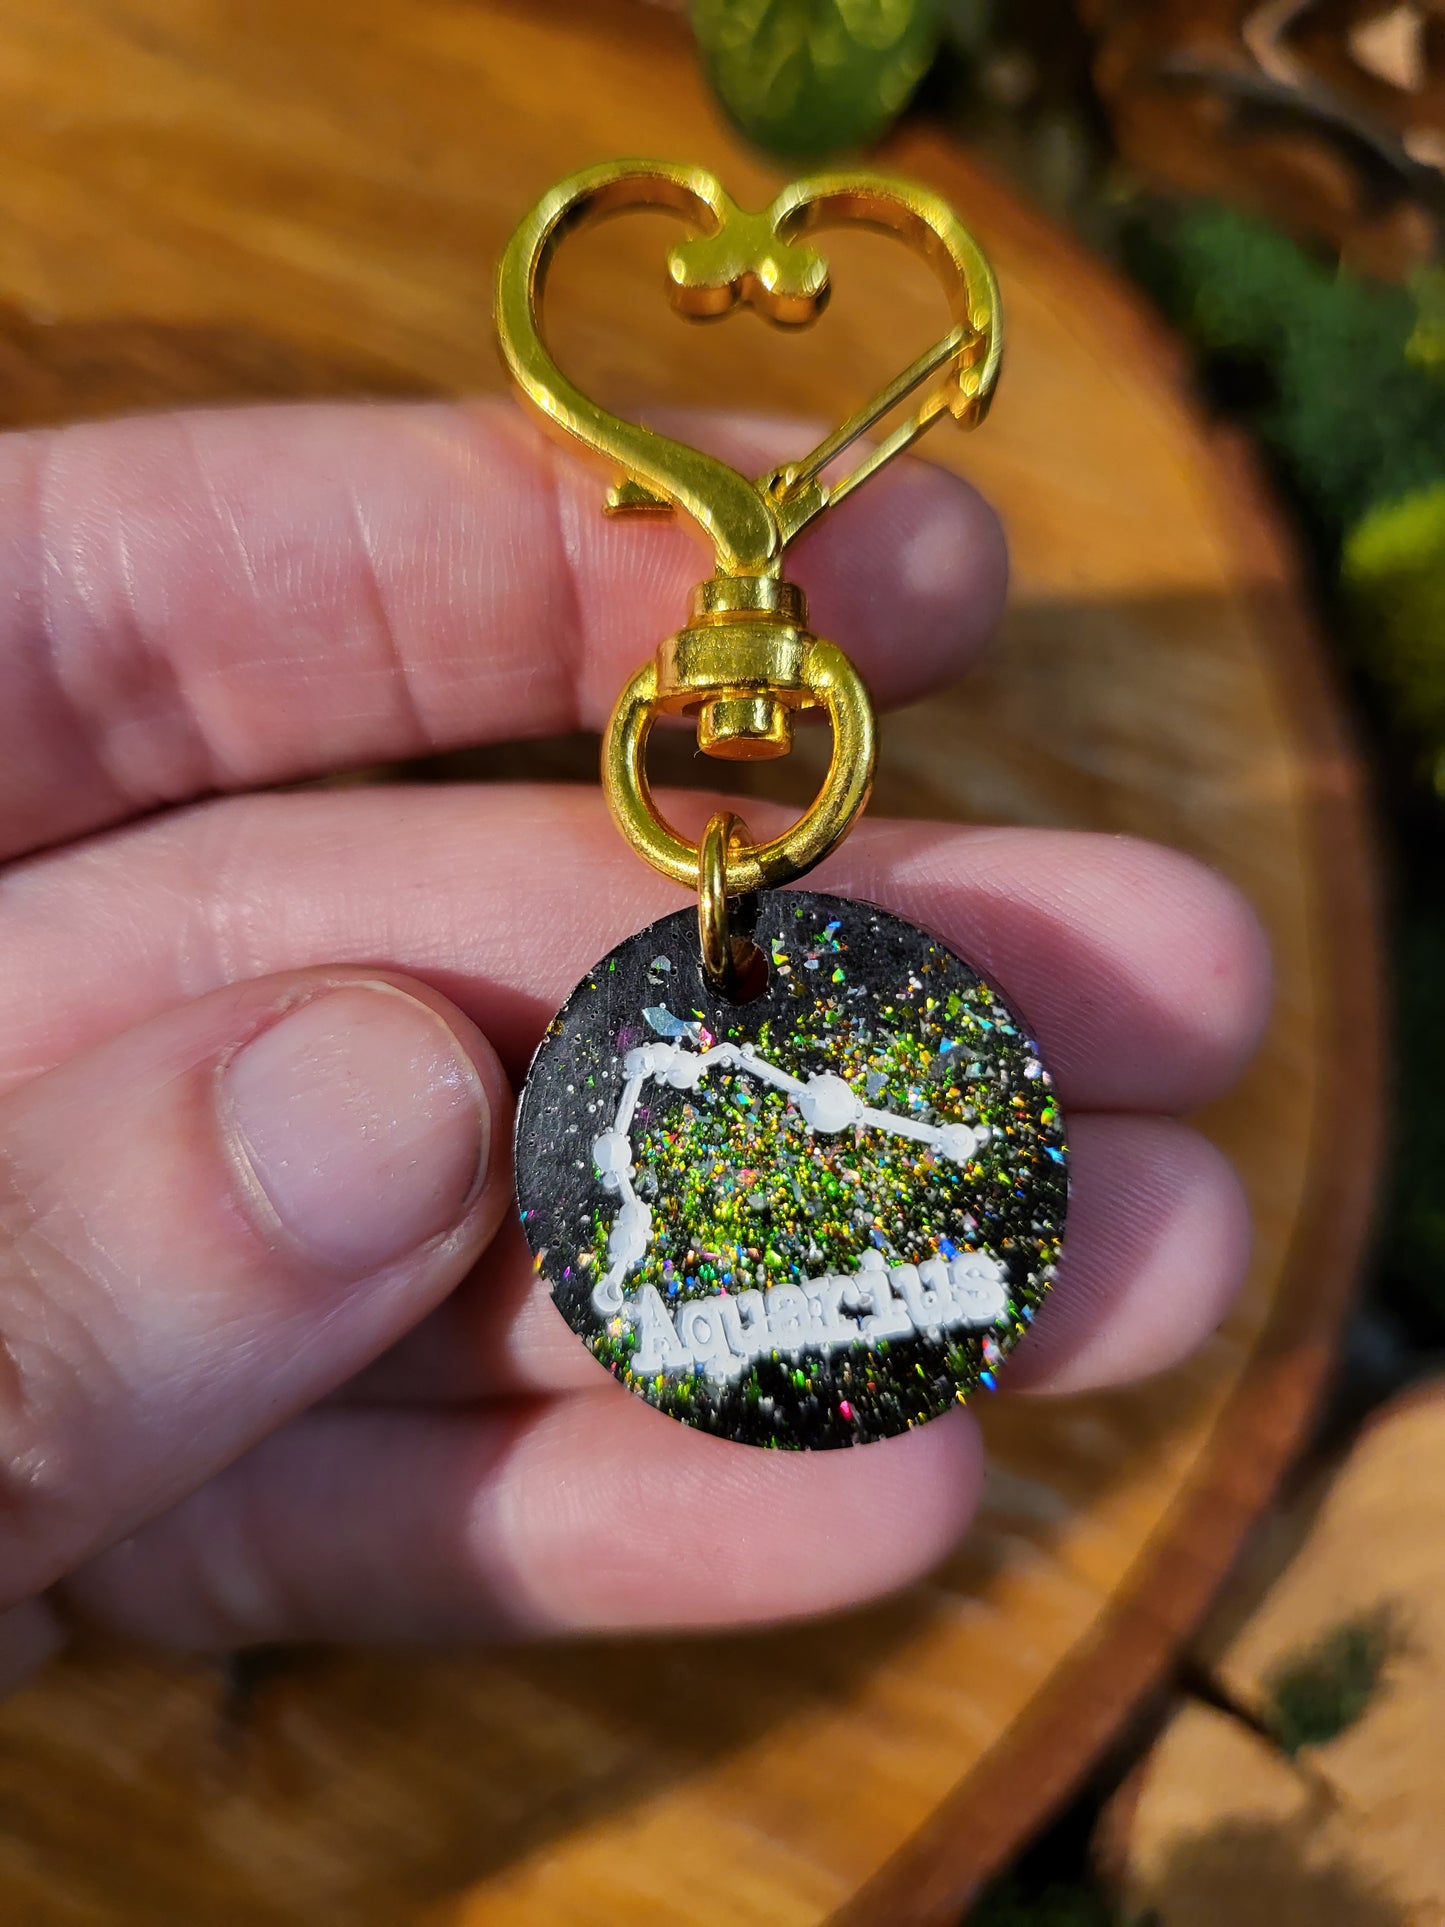 Black Galaxy Astrological Keychains with Charms